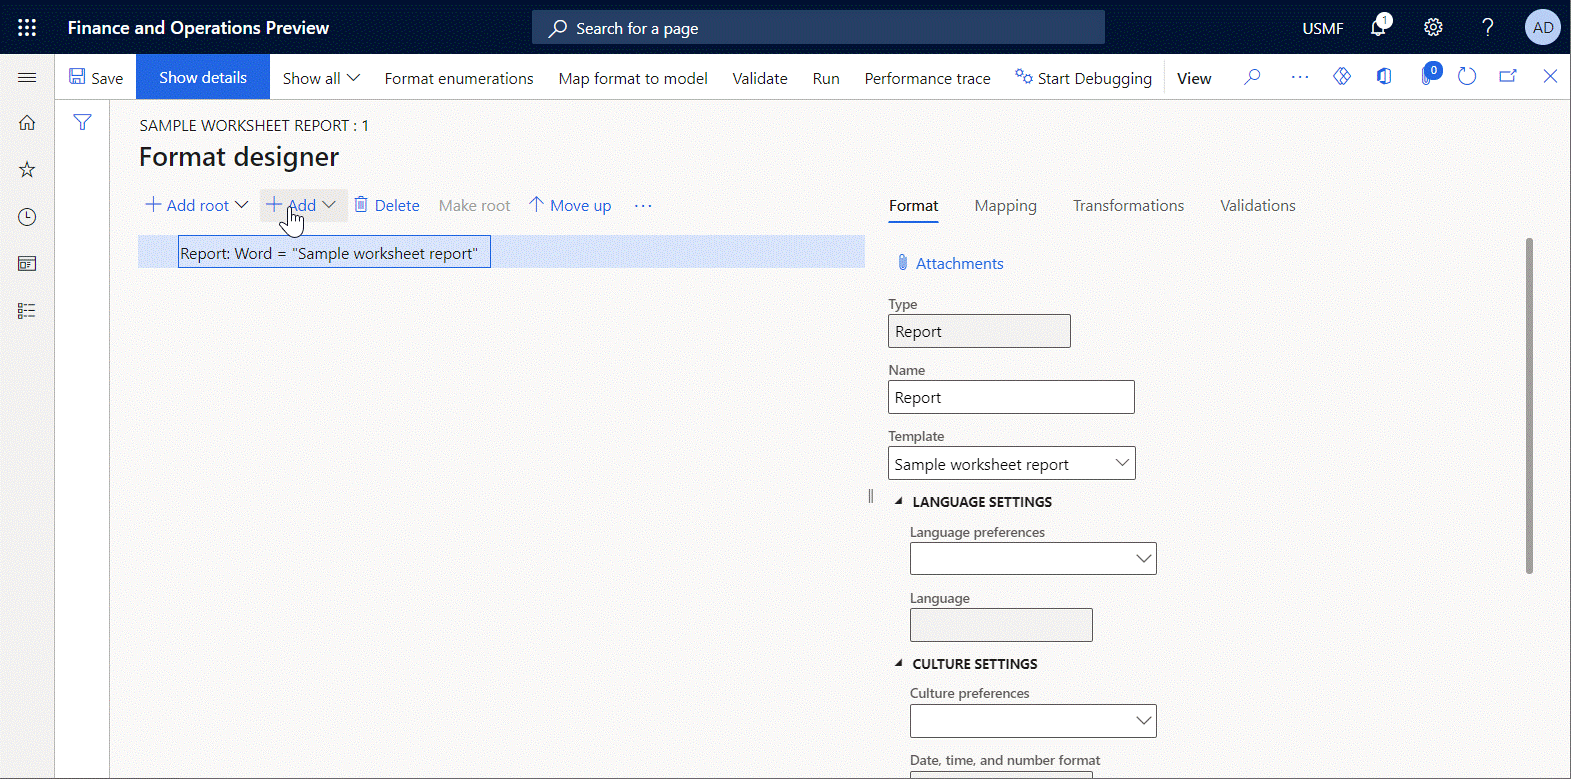 Adding nested elements on the Format designer page.